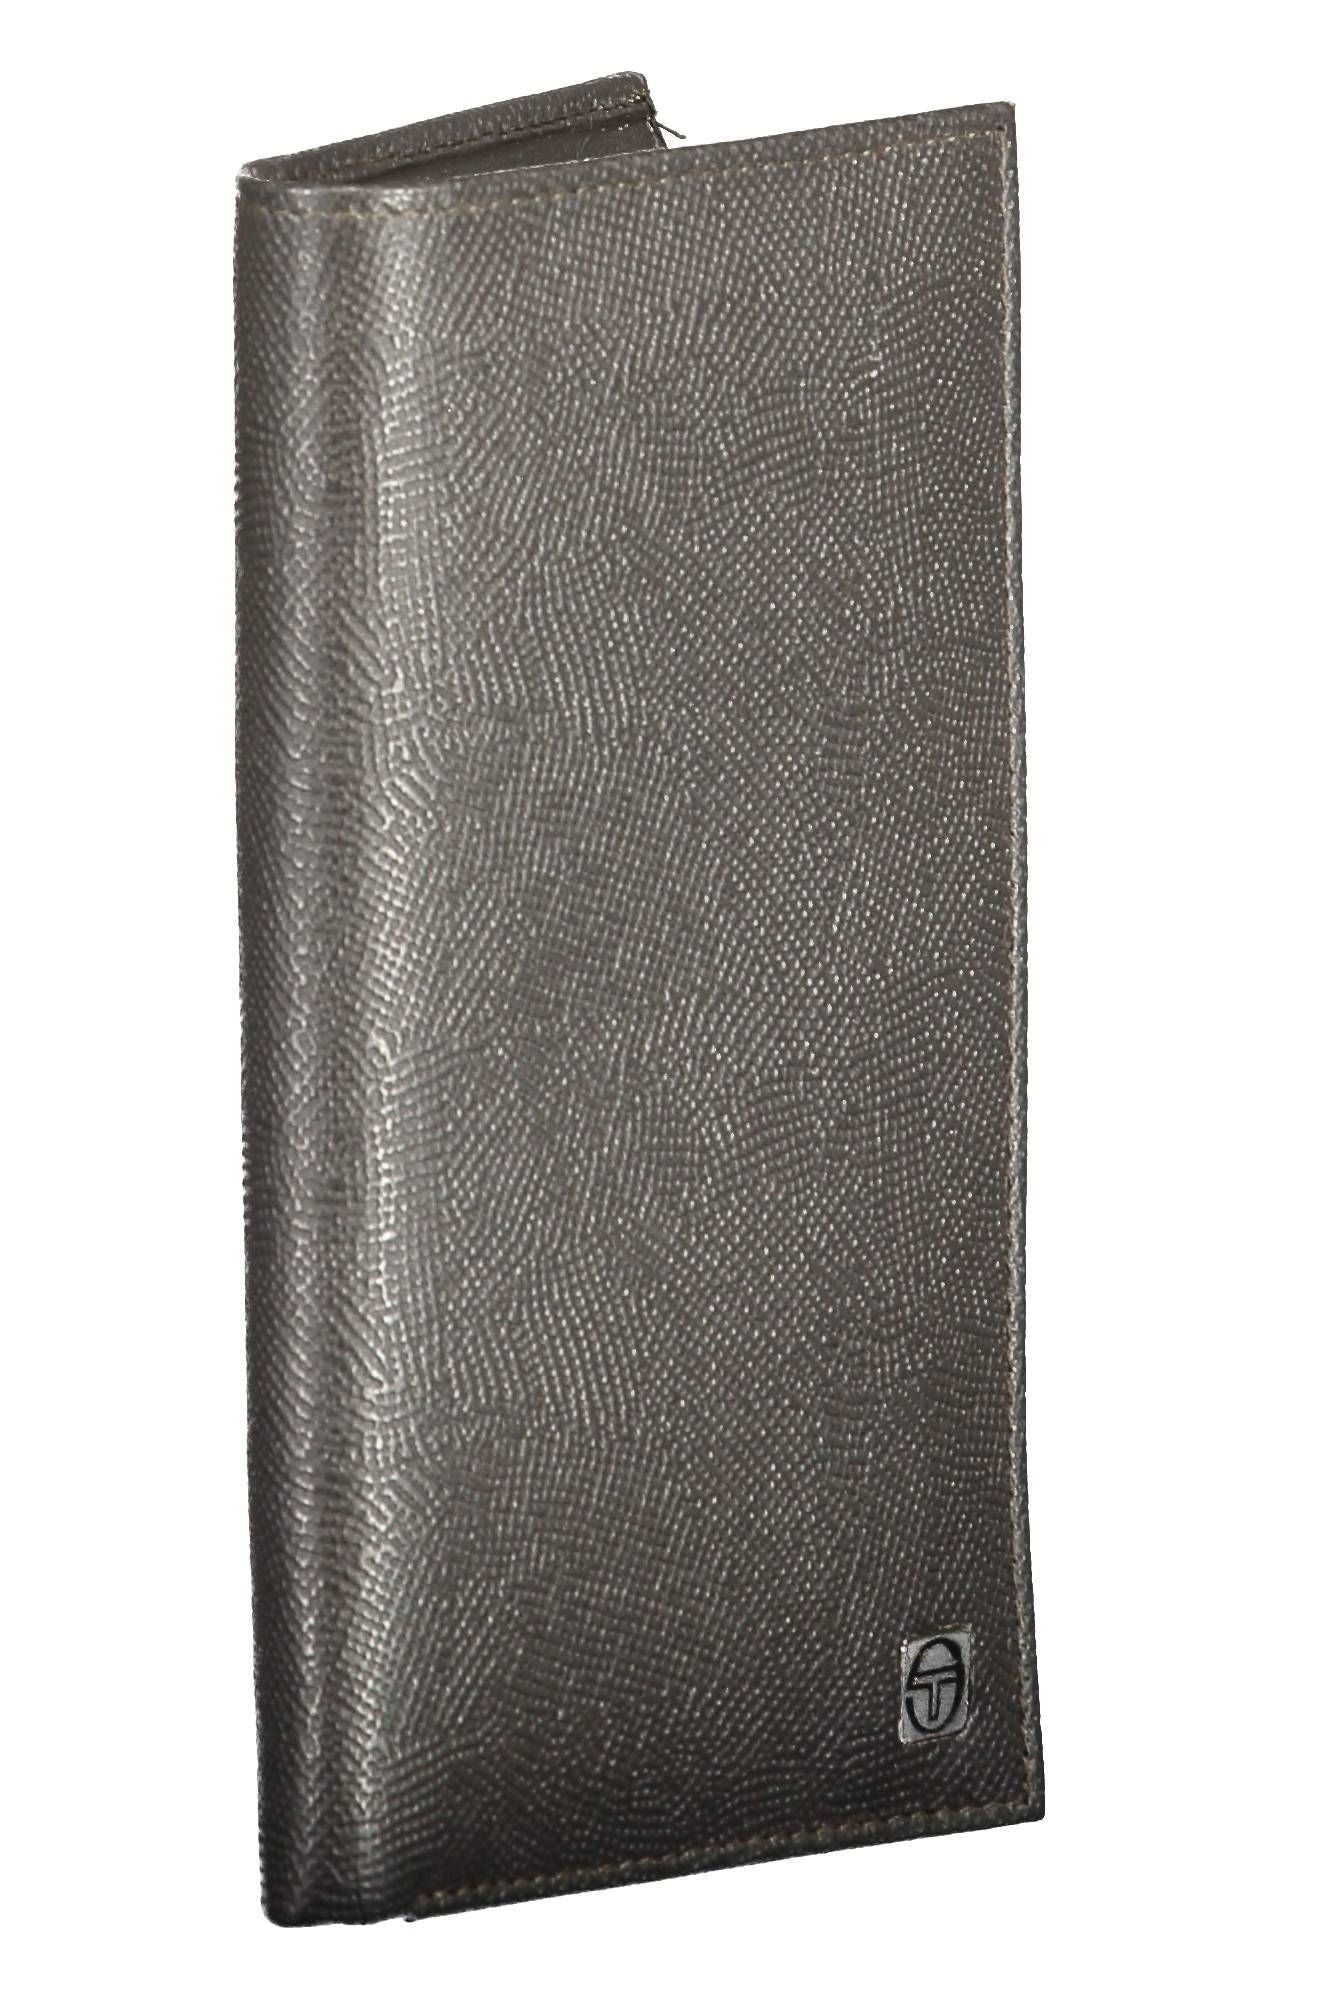 Sergio Tacchini Elegant Leather Bifold Wallet with Coin Pocket